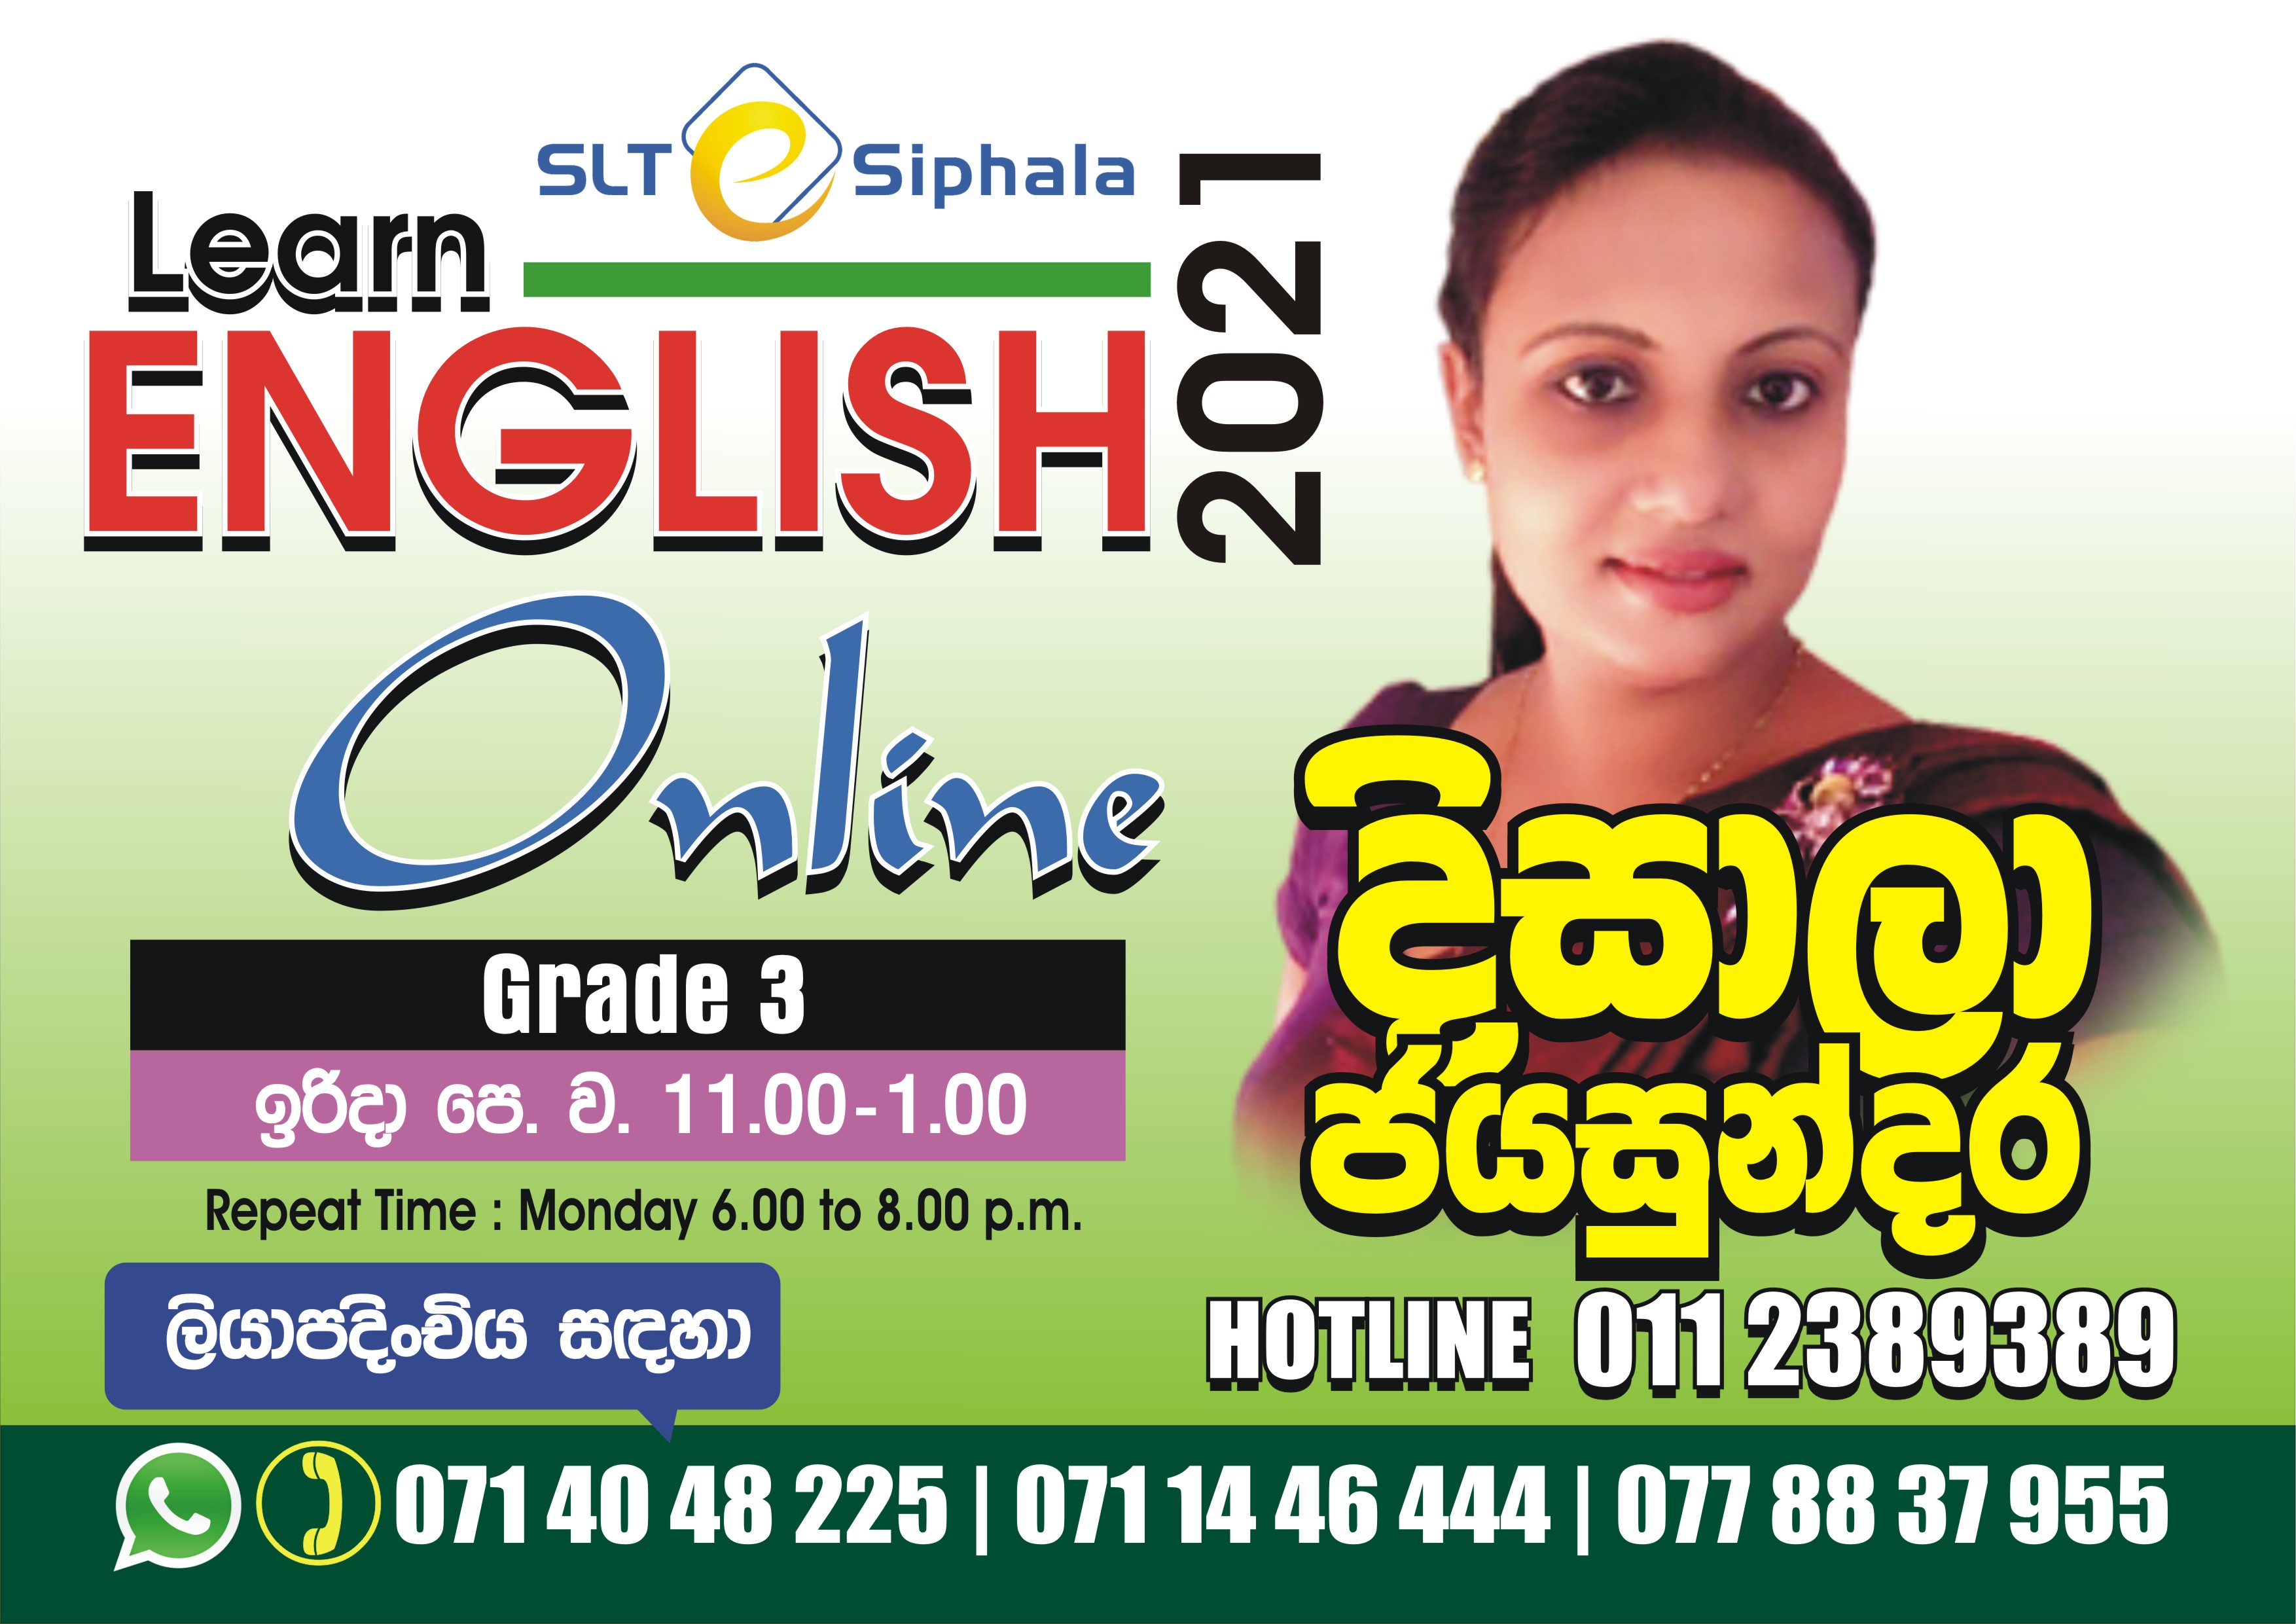 Grade 03 (2021)- January SUNDAY FROM 11.00 am TO 1.00 pm